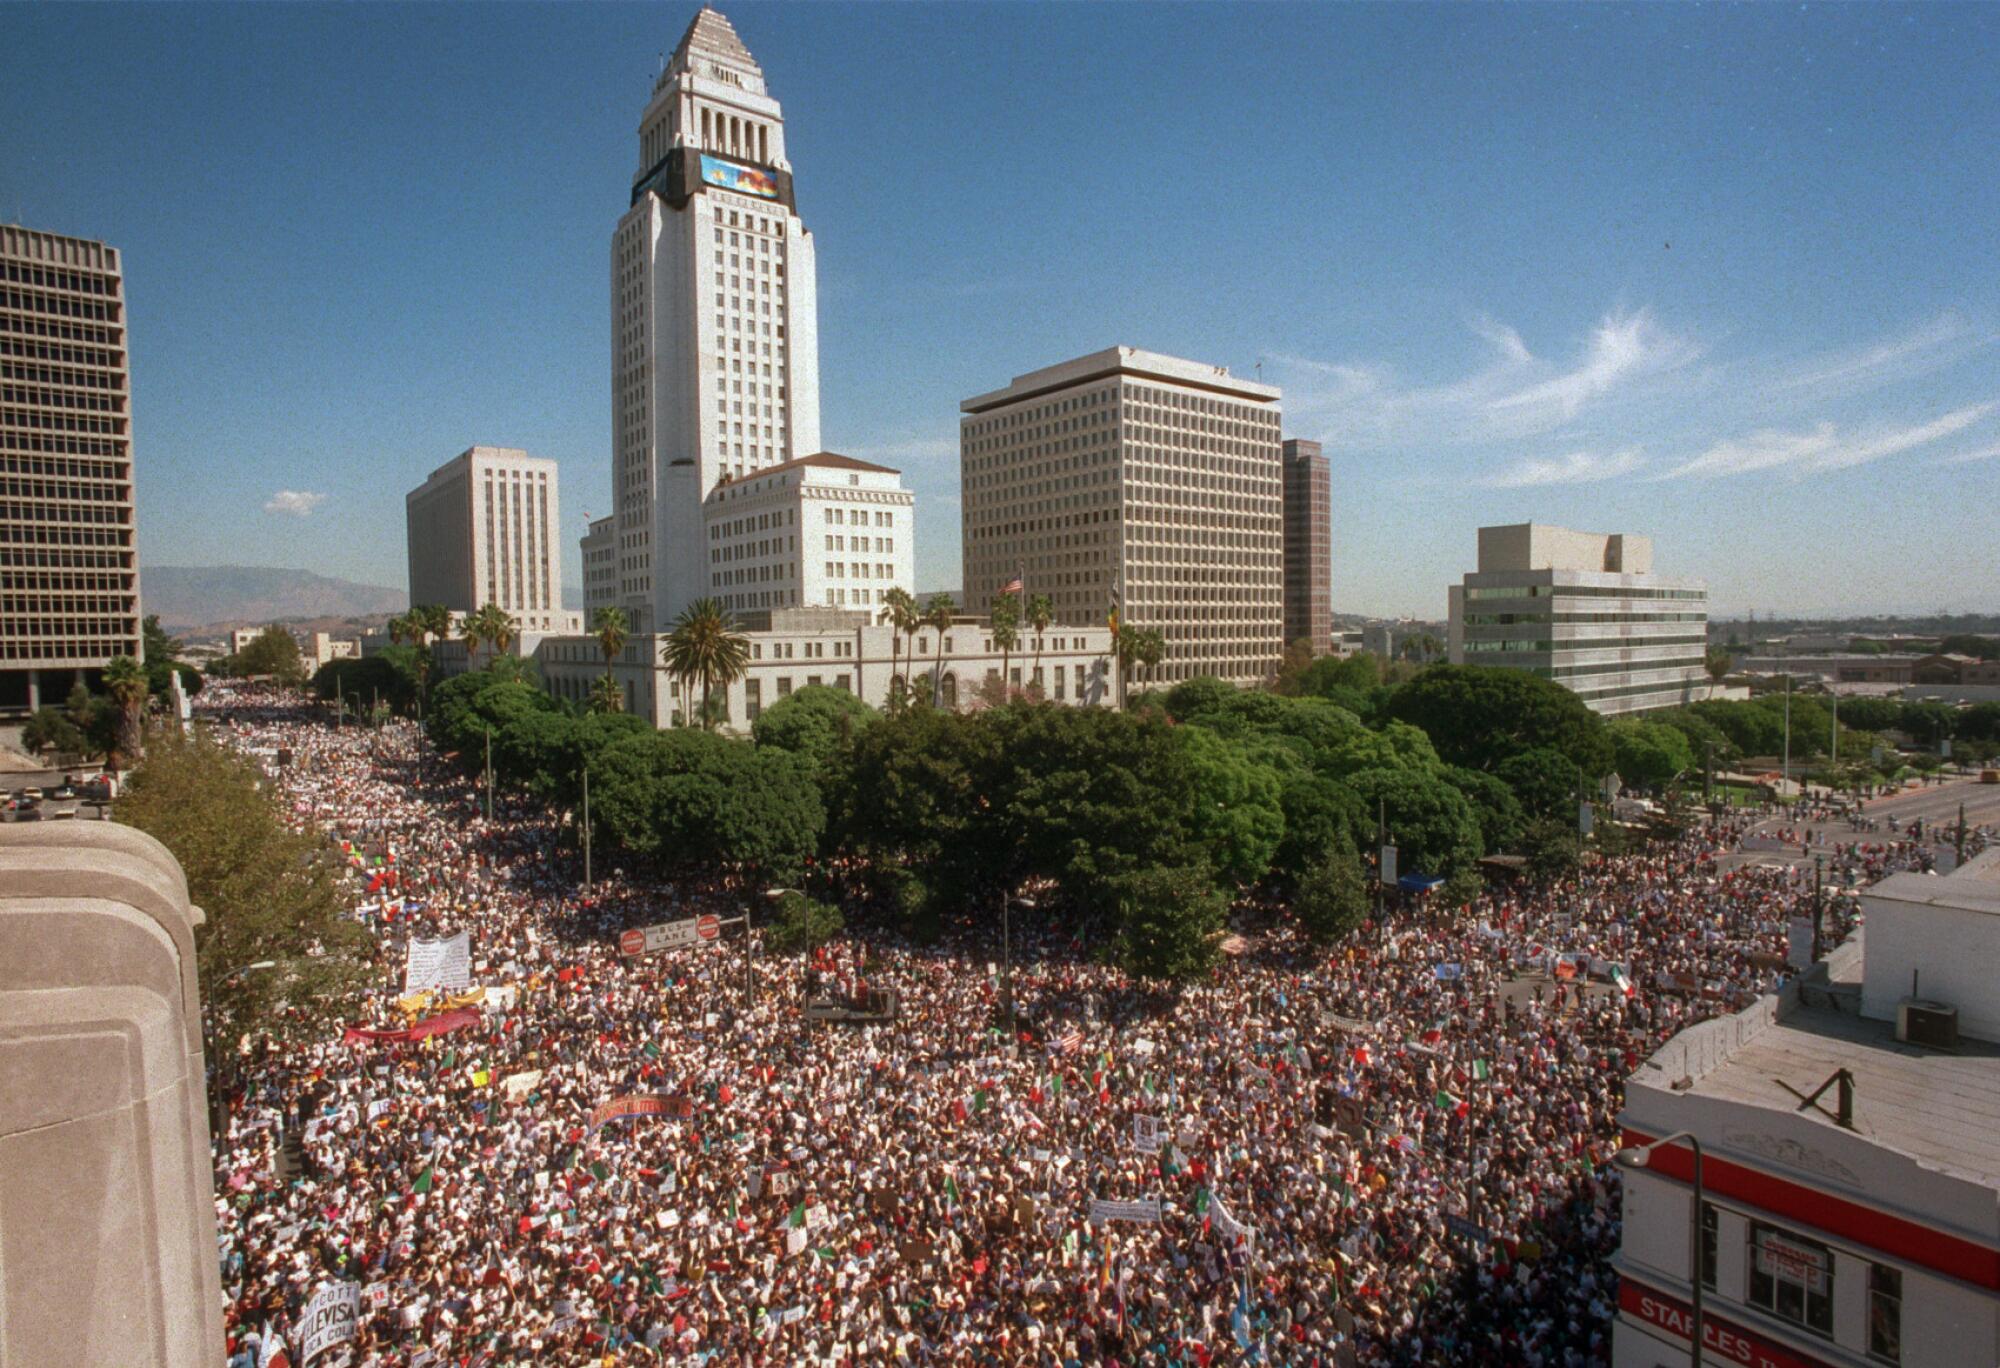 About 70,000 protest Prop. 187 at L.A. City Hall